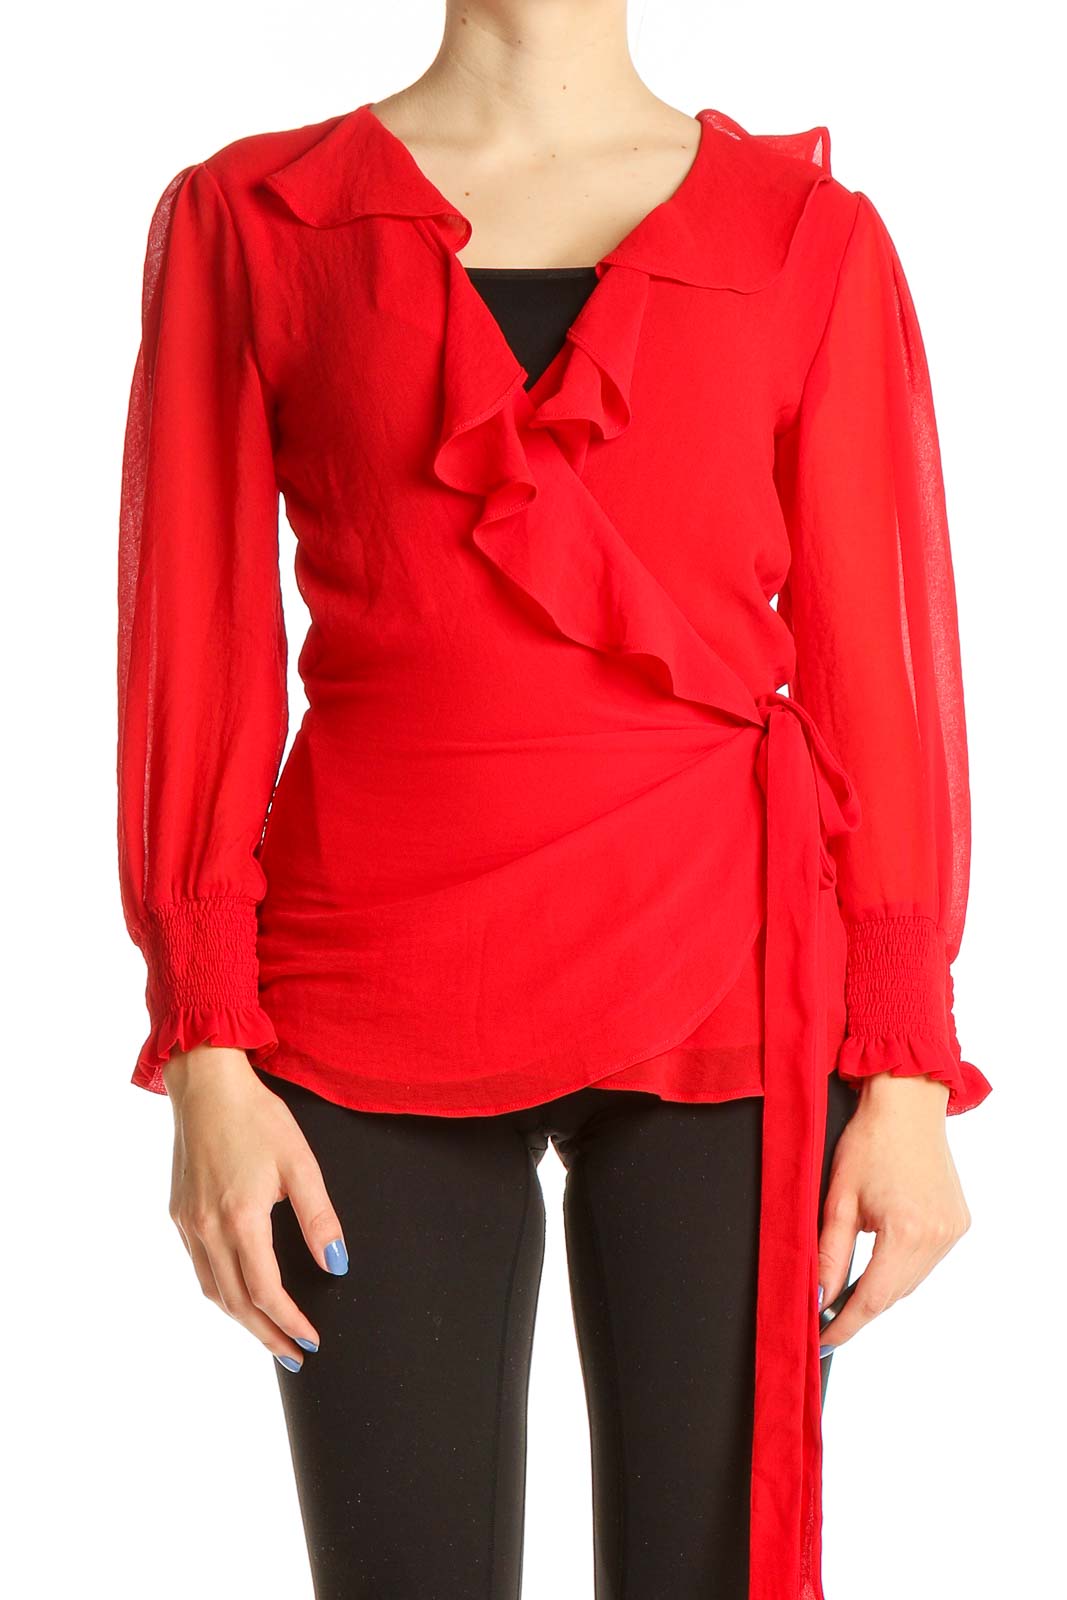 Red Retro Wrap Top Front